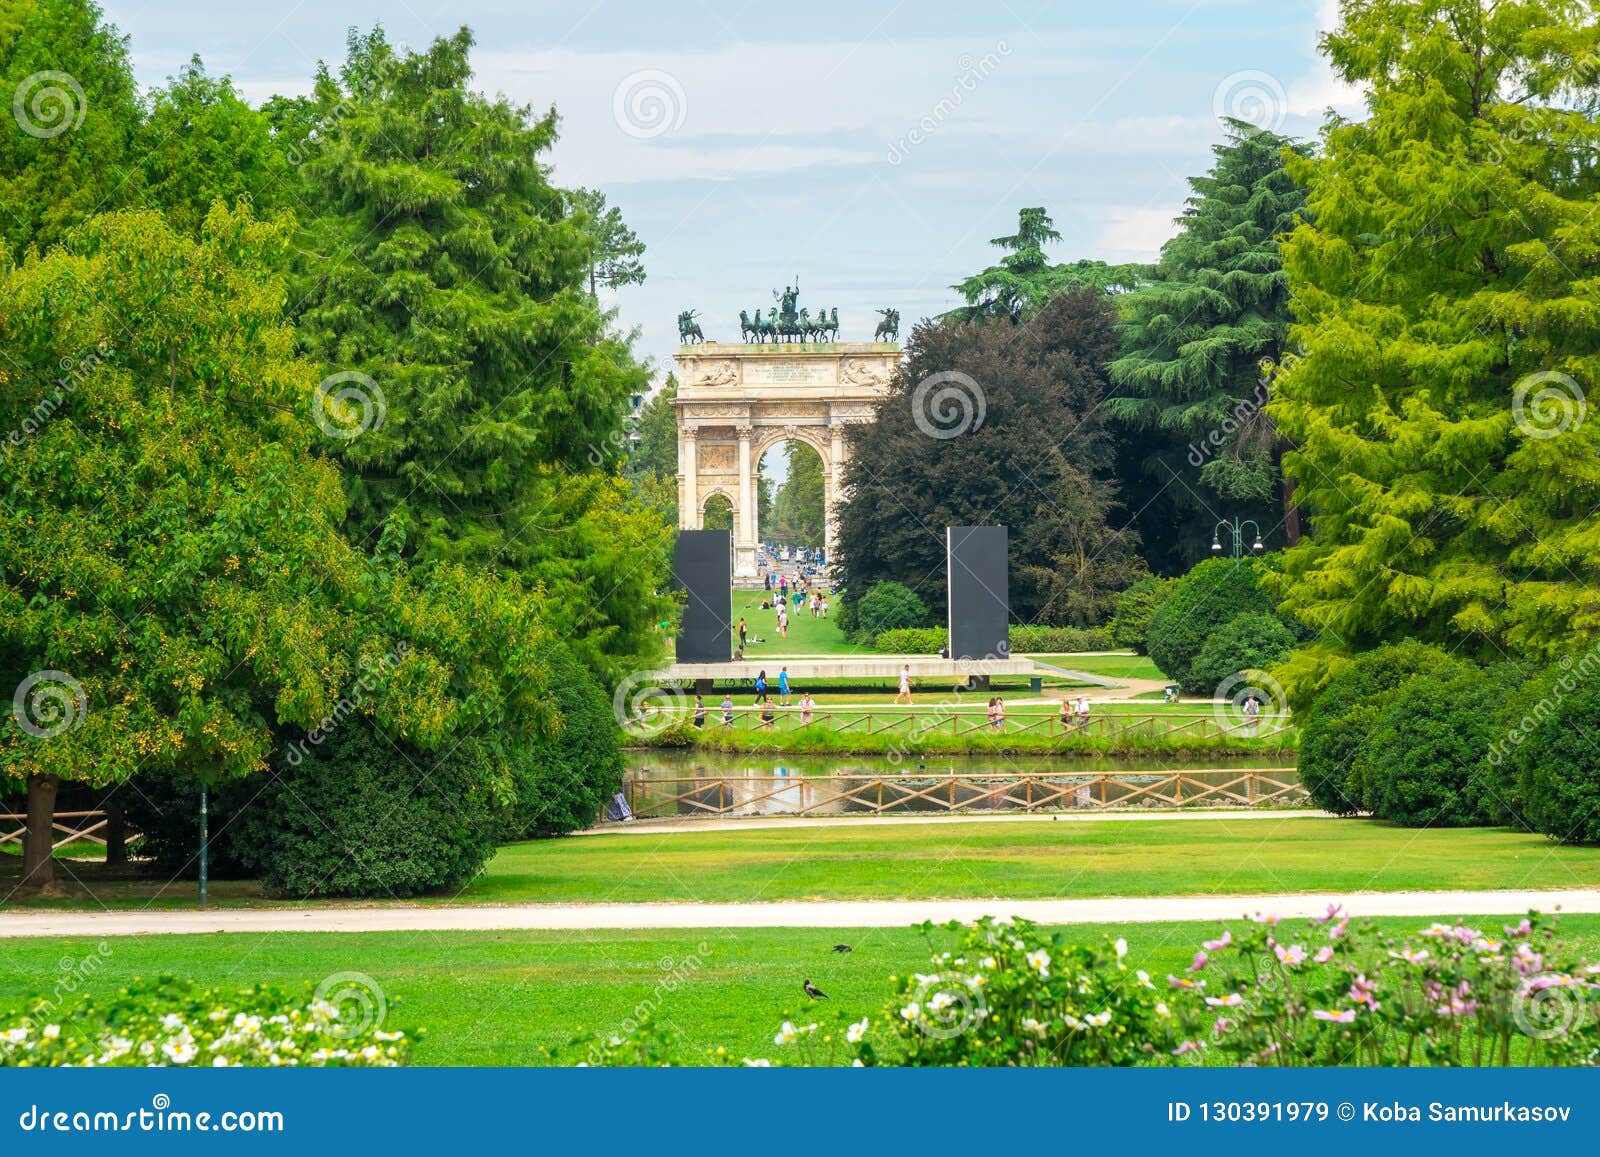 Beautiful View of Parco Sempione in Milan Stock Image - Image of green ...